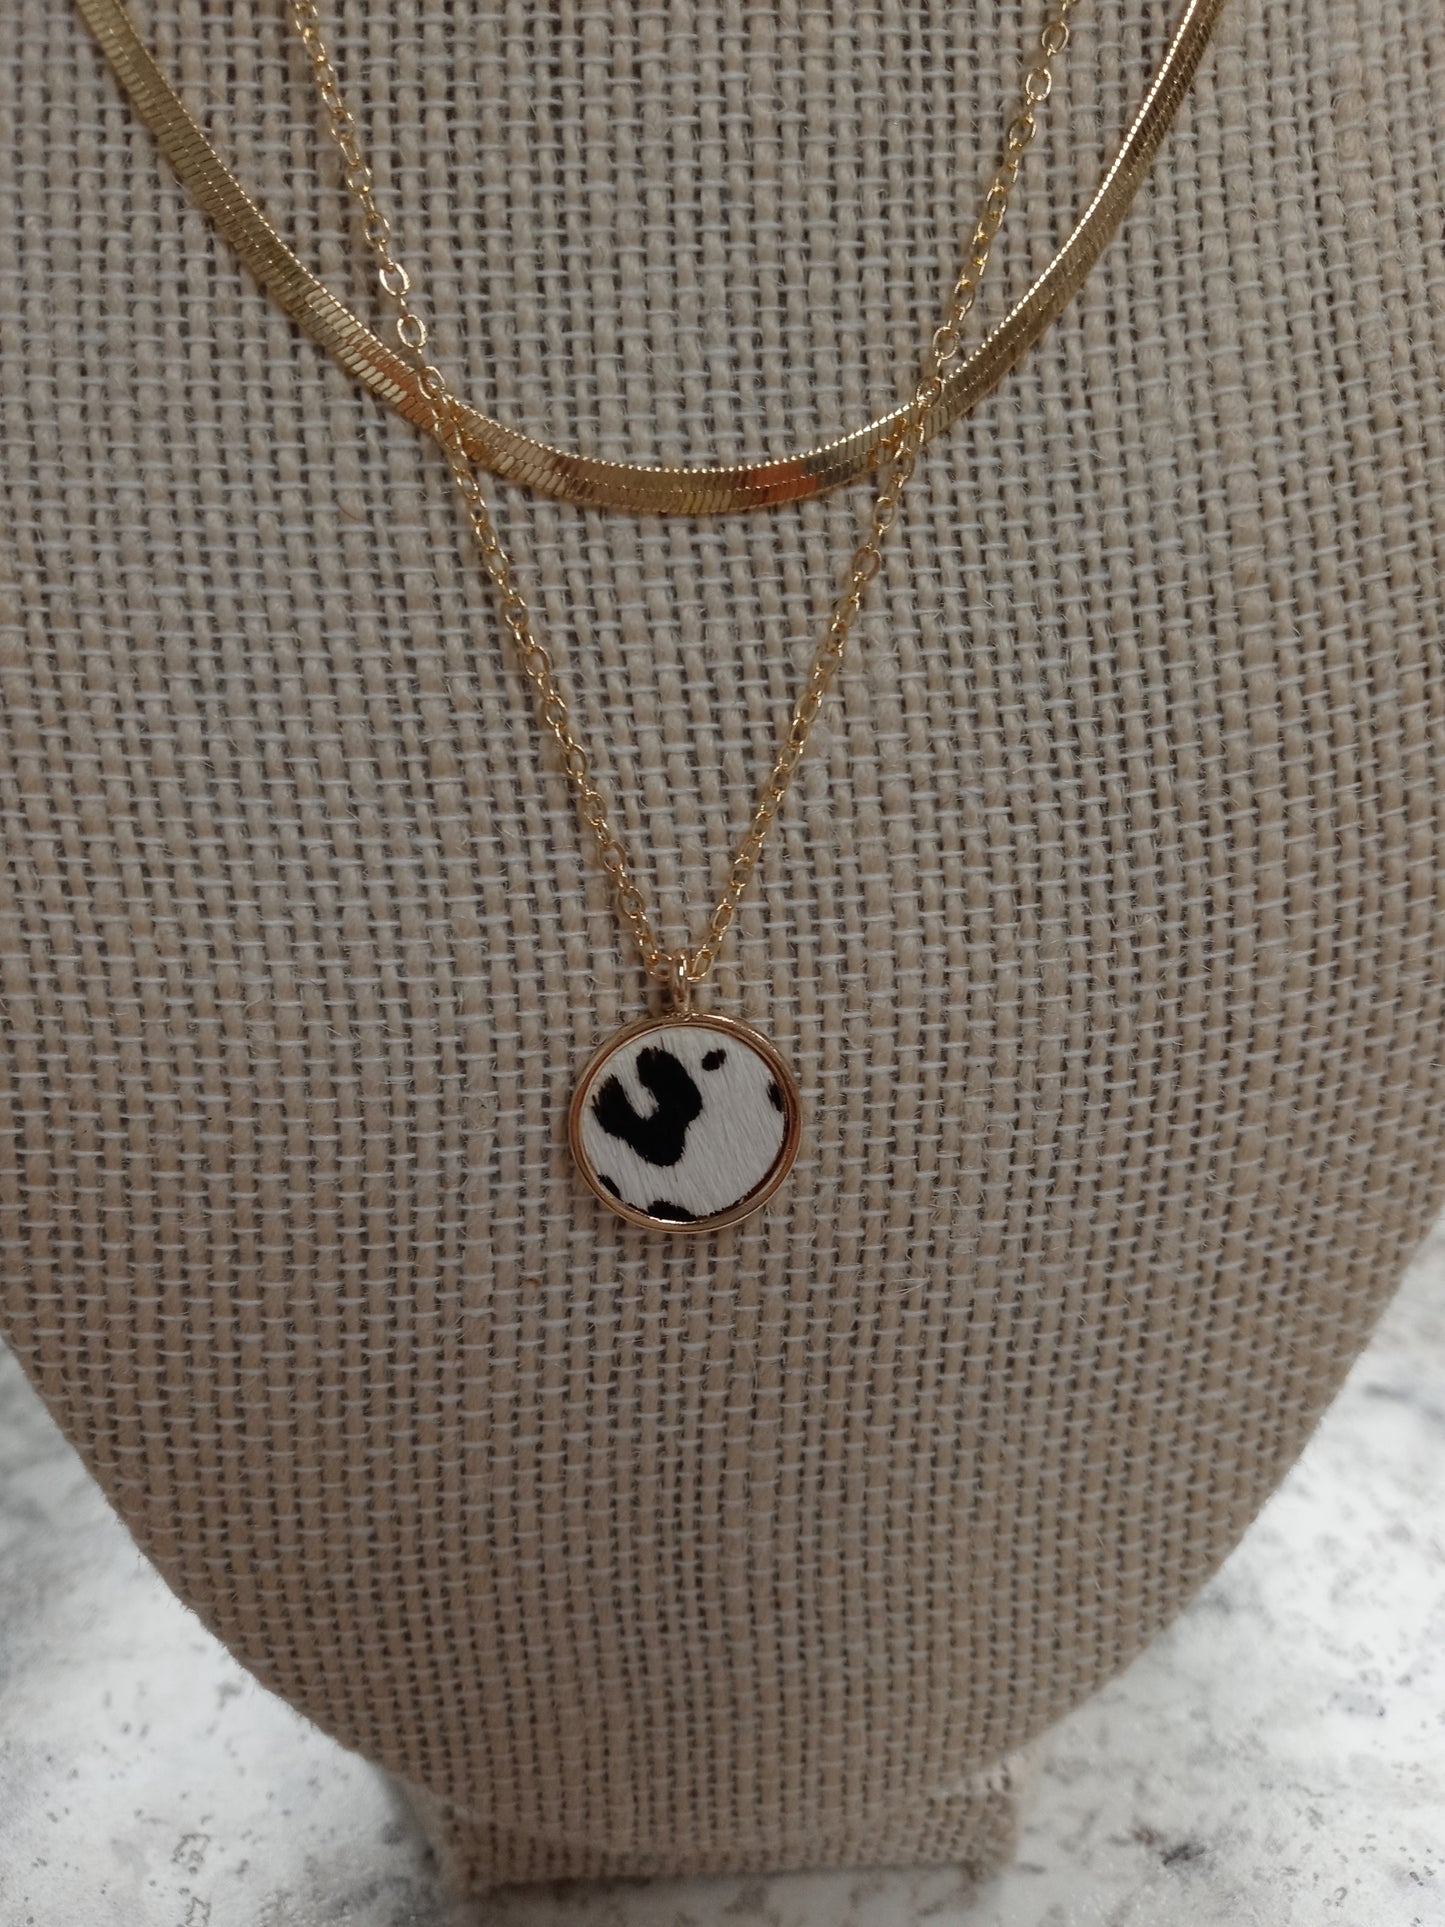 Double Gold Chain w/ Animal Print Disk Necklace